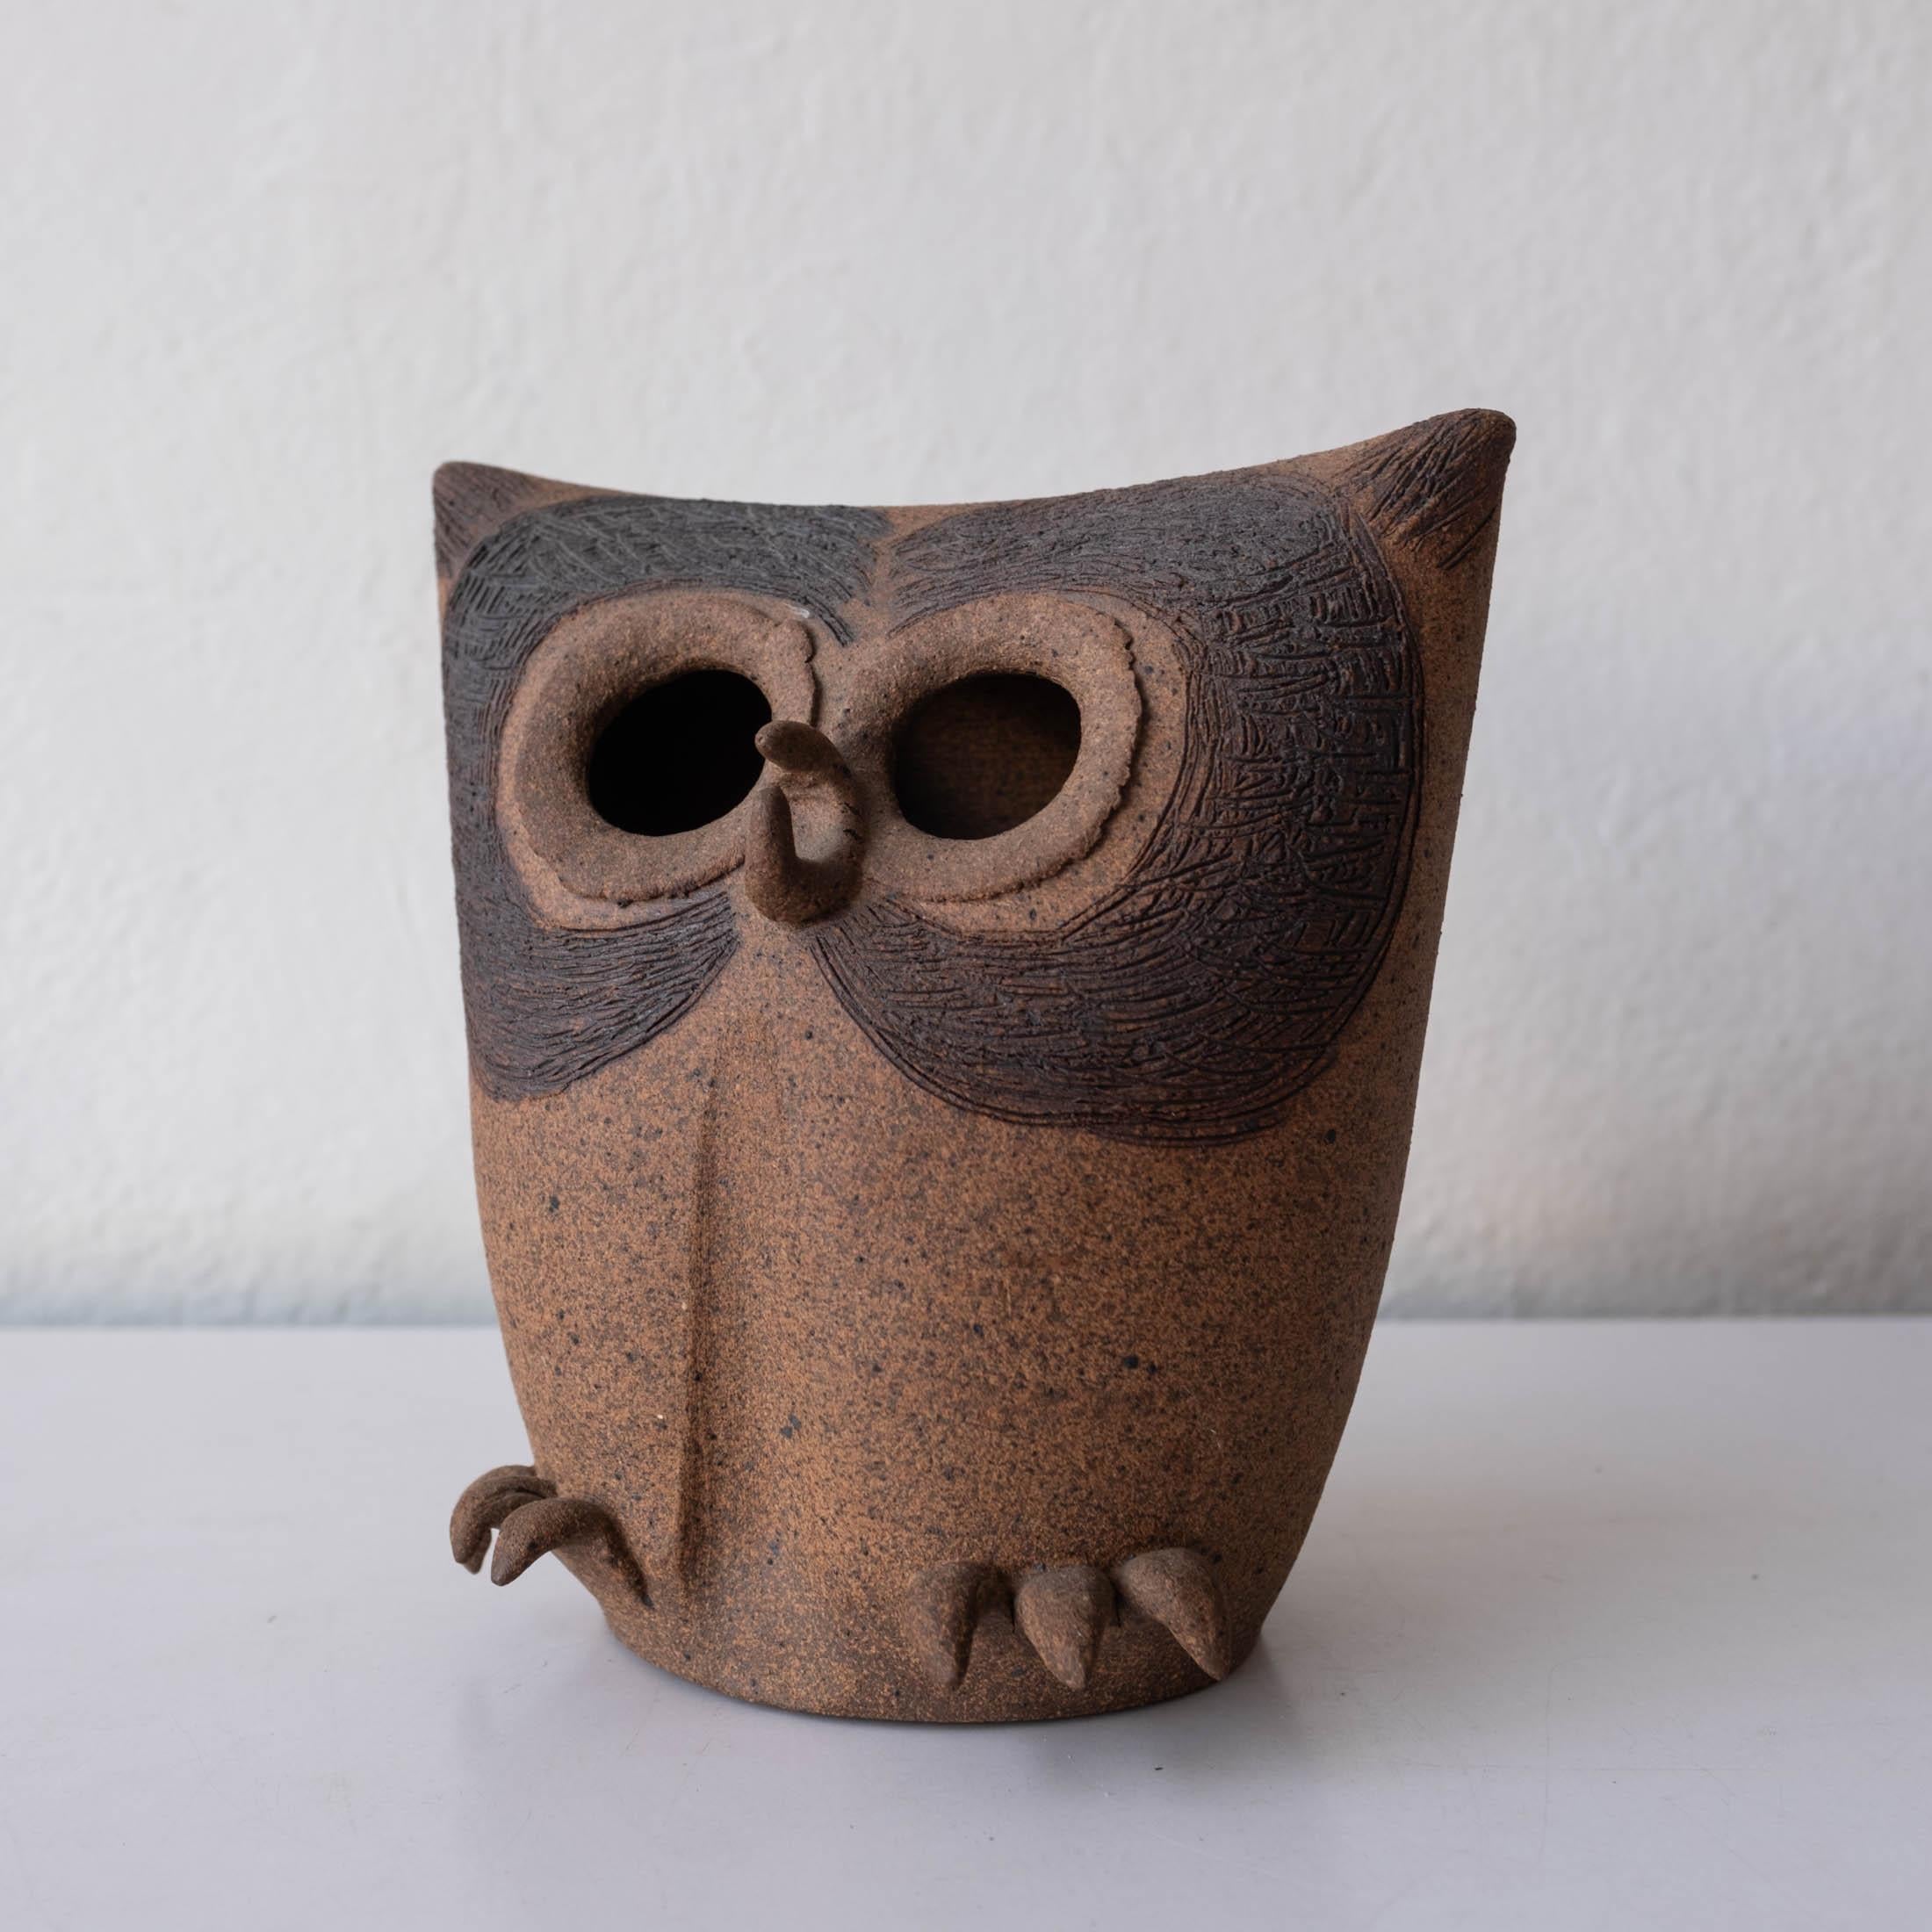 1960s owl sculpture or lantern. Carved stoneware. Signed illegibly on the interior. 